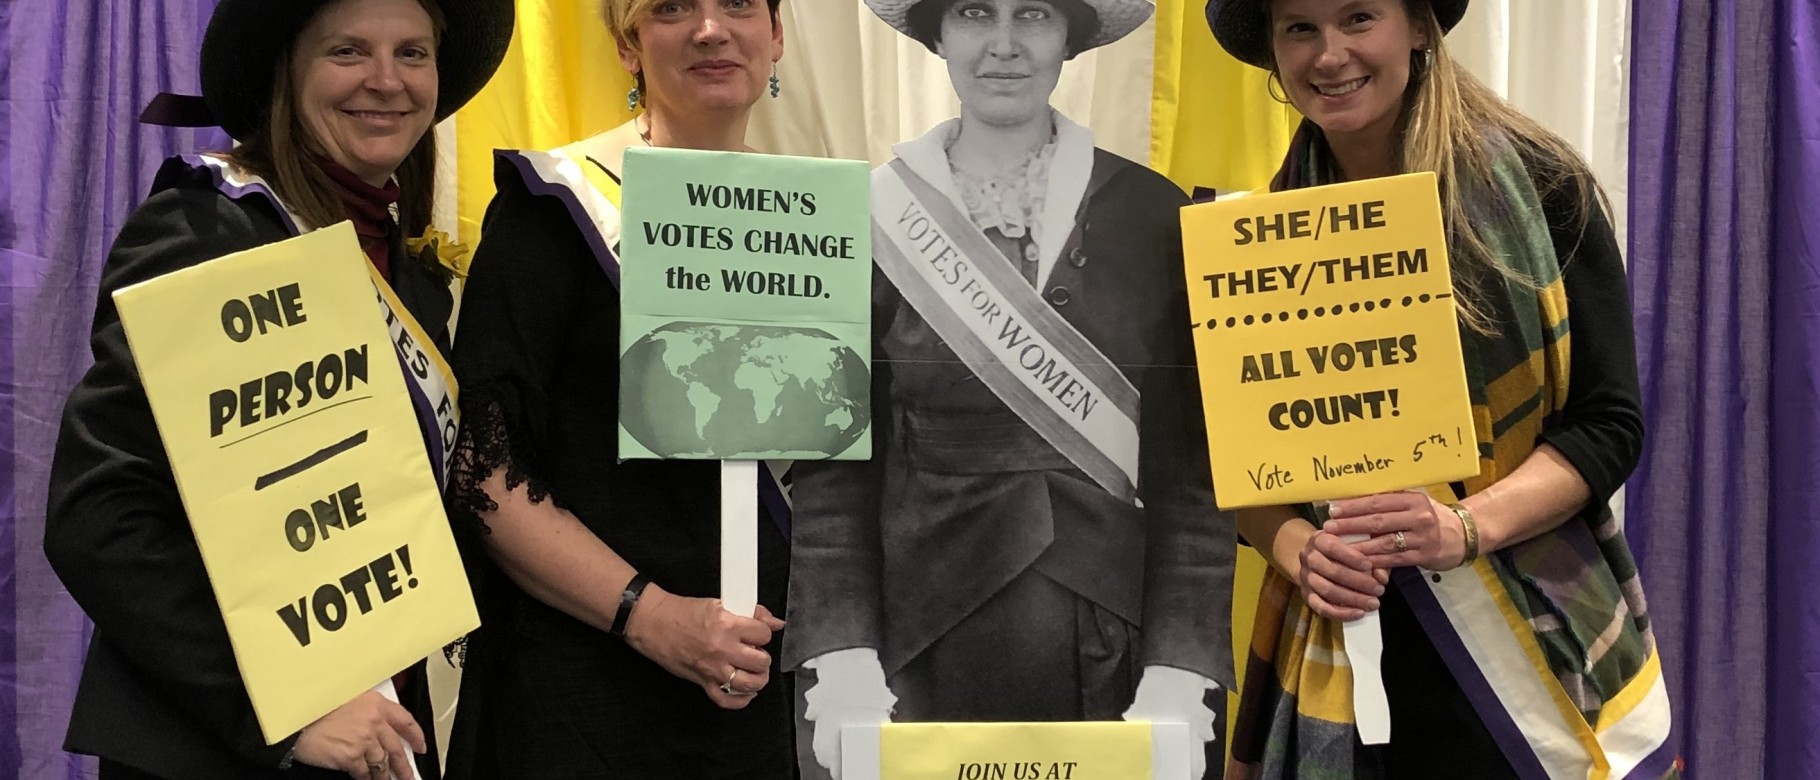 Attendees pose with an image of Katharine Dexter McCormick of the National Woman’s Suffrage Association 